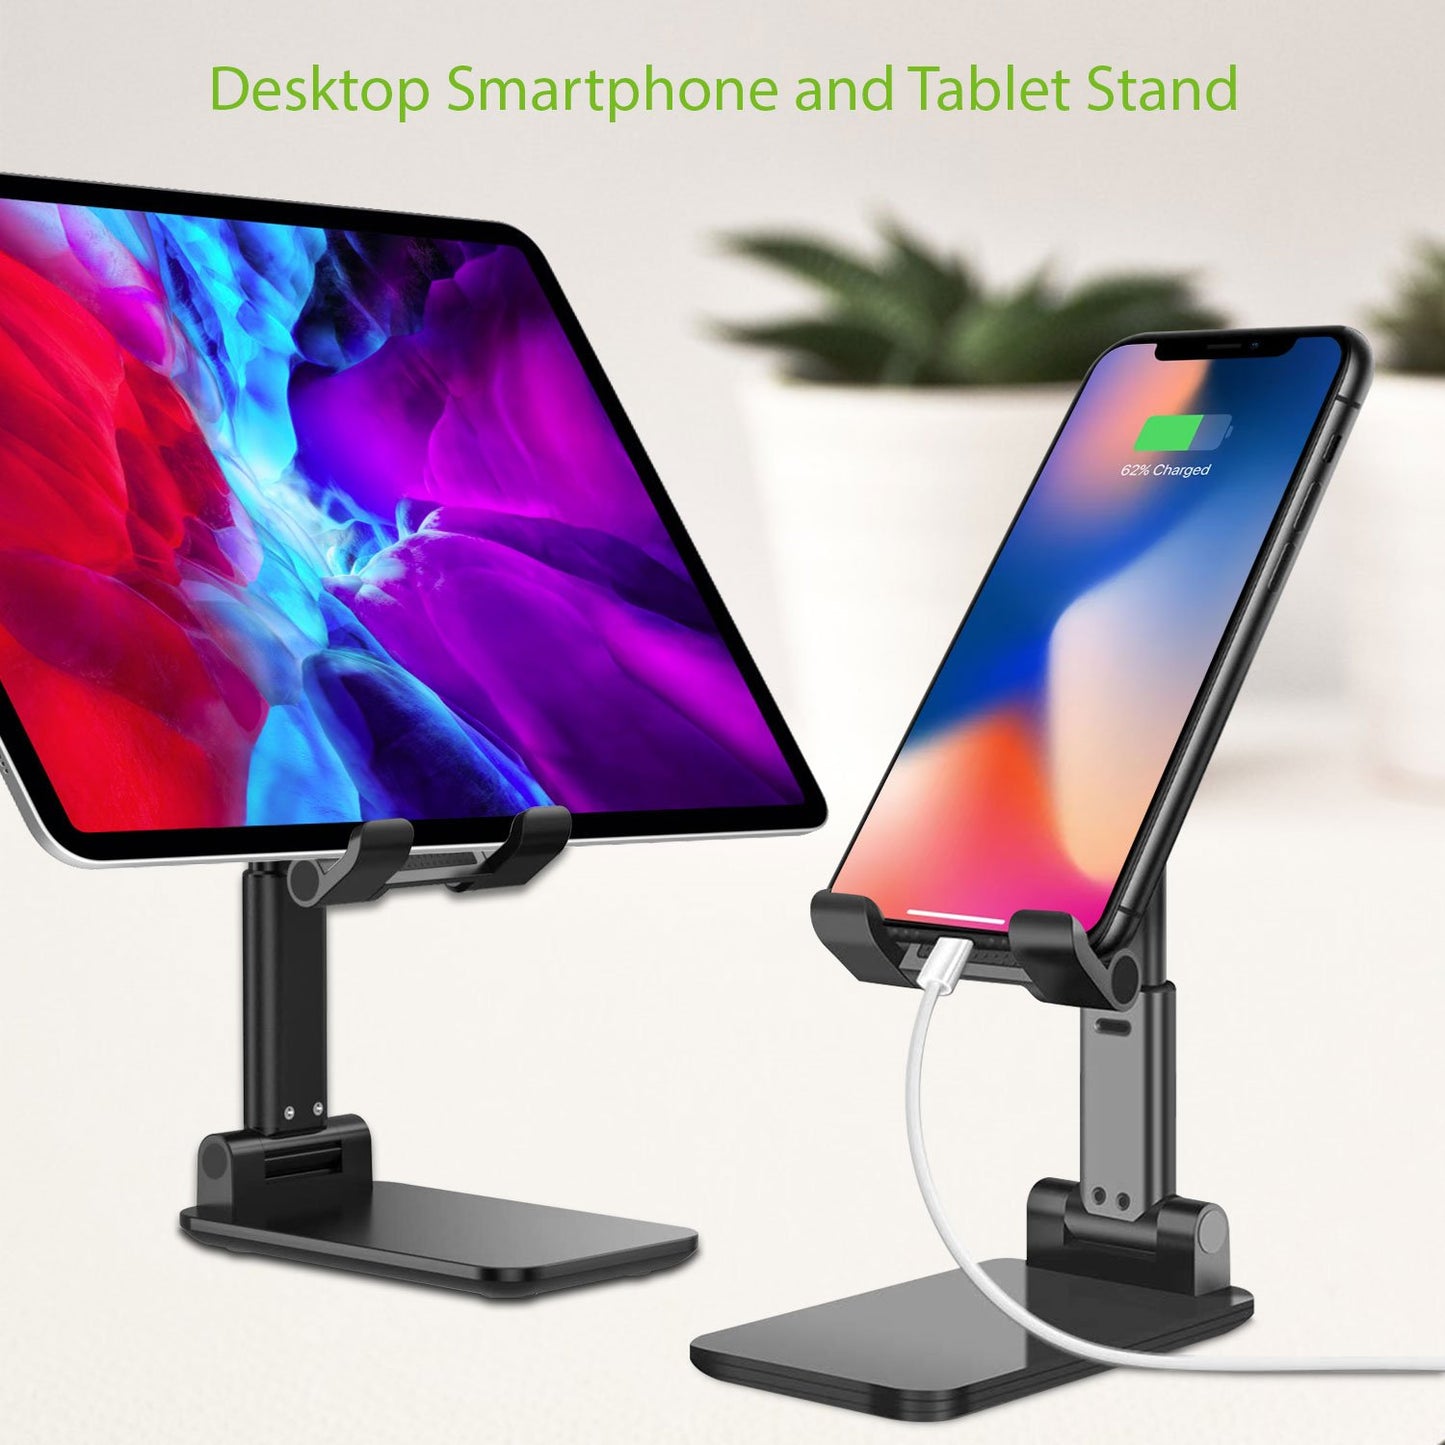 PH60BK -   Adjustable Desktop Smartphone and Tablet Stand with Non-Slip Rubberized Grips and Weighted Base Compatible to Smartphones, Tablets, iPads